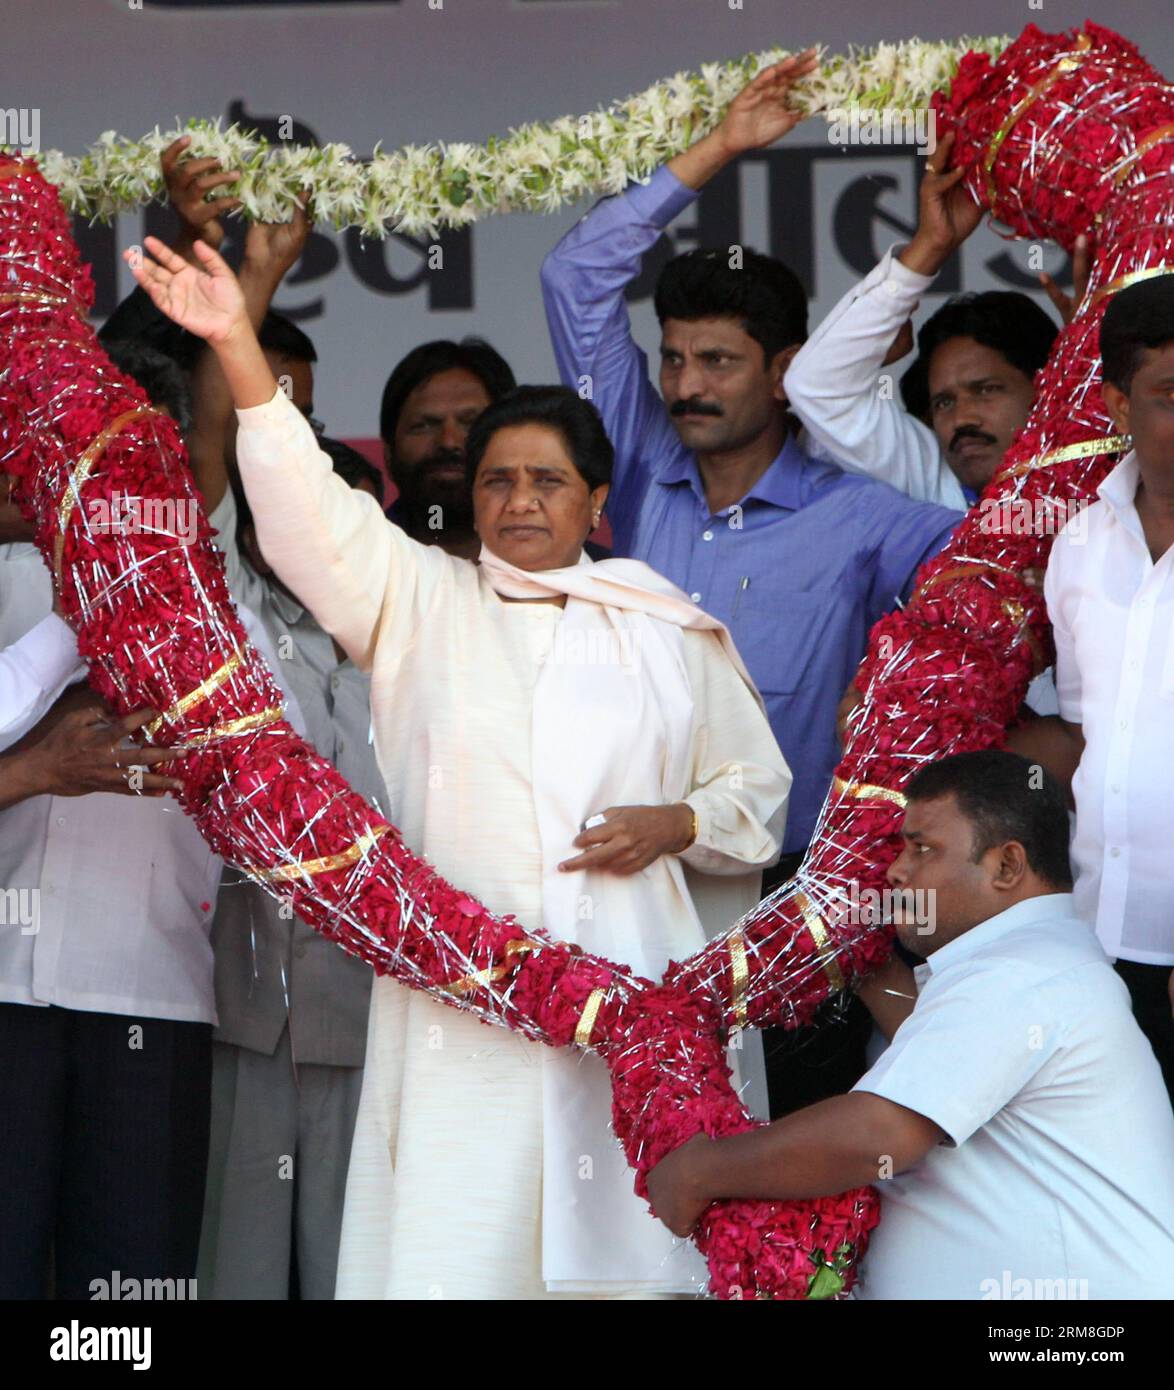 (140413) -- MUMBAI, April 13, 2014 (Xinhua) -- Bahujan Samaj Party (BSP) President Mayawati (C) attends a rally for her party s Loksabha election candidates from all over Mumbai, in Mumbai, India, April 13, 2014. (Xinhua/Stringer) INDIA-MUMBAI-ELECTION PUBLICATIONxNOTxINxCHN   Mumbai April 13 2014 XINHUA Bahujan Samaj Party GNP President Mayawati C Attends a Rally for her Party S  ELECTION Candidates from All Over Mumbai in Mumbai India April 13 2014 XINHUA Stringer India Mumbai ELECTION PUBLICATIONxNOTxINxCHN Stock Photo